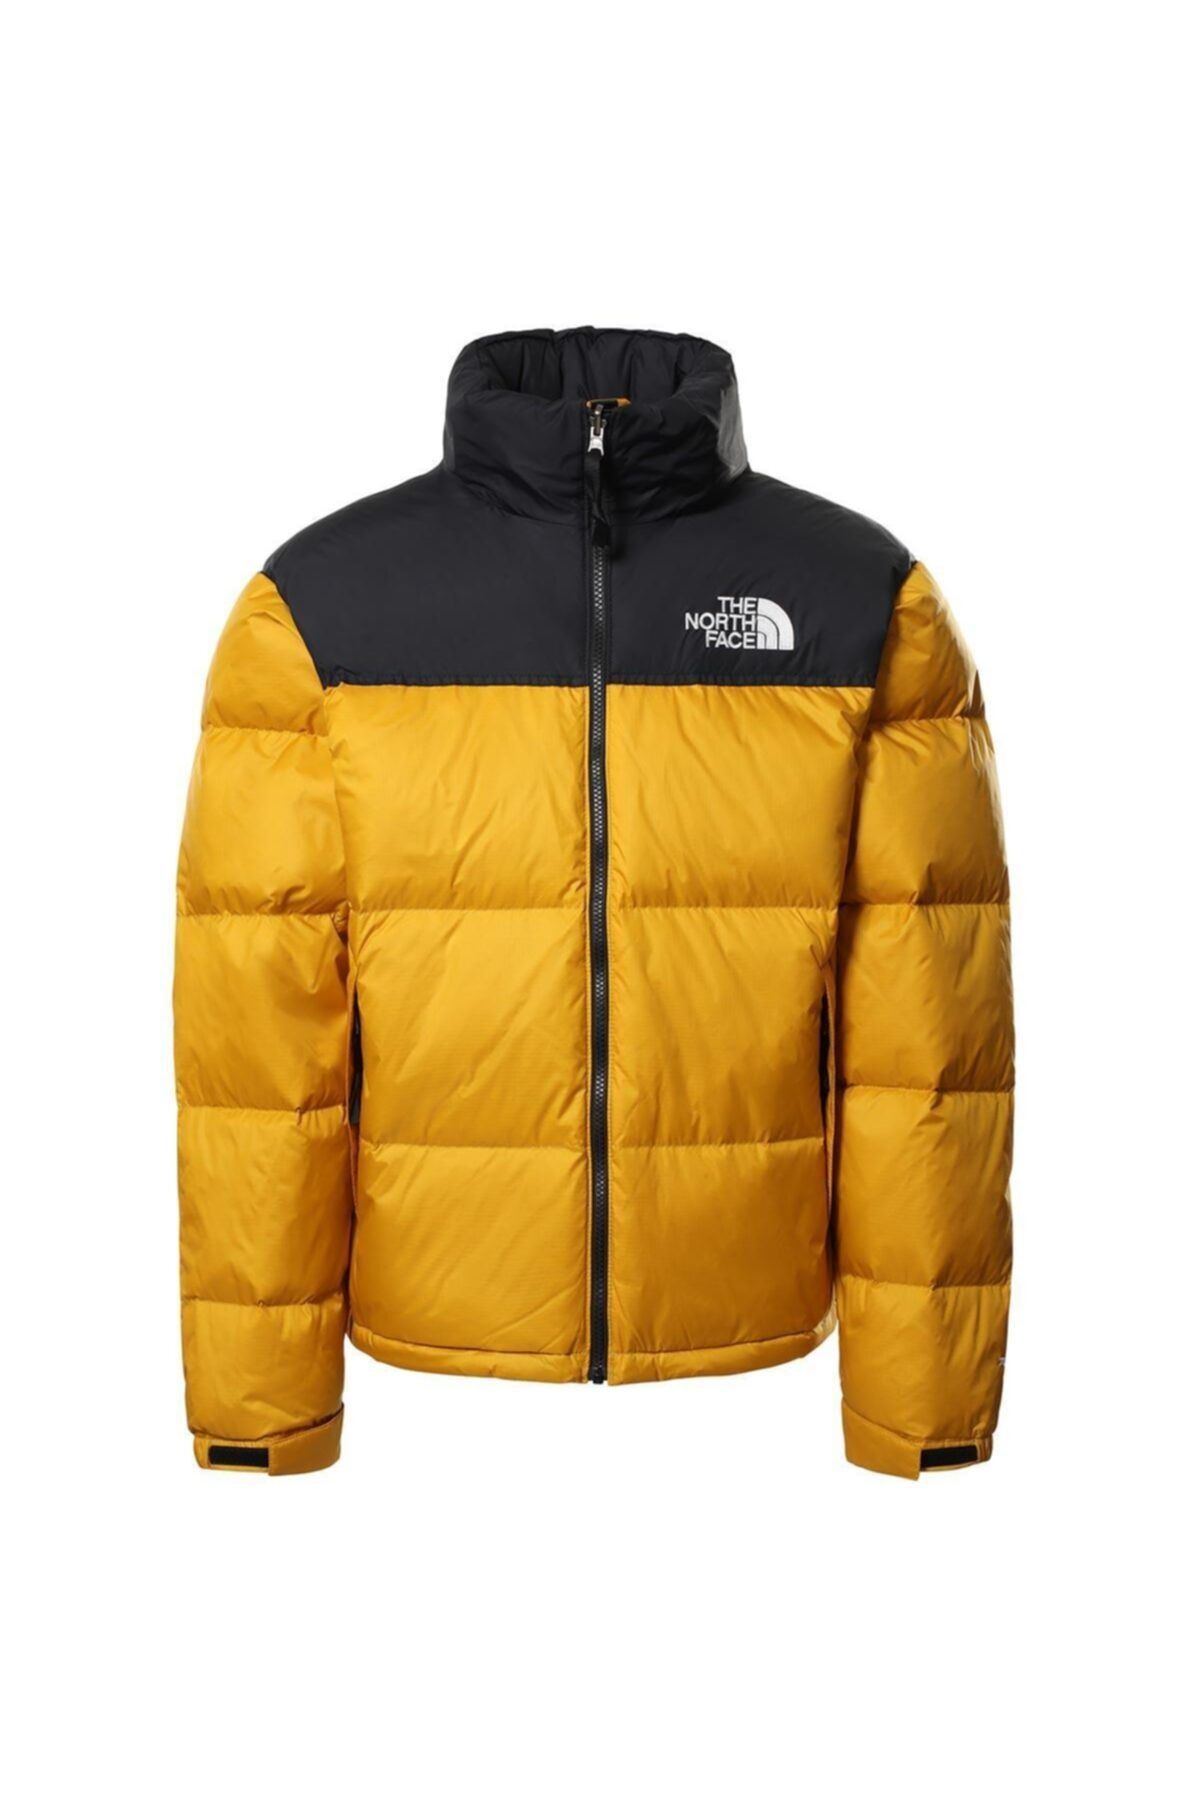 The North Face The Northface Erkek 1996 Rtro Npse Ceket Nf0a3c8dh9d1